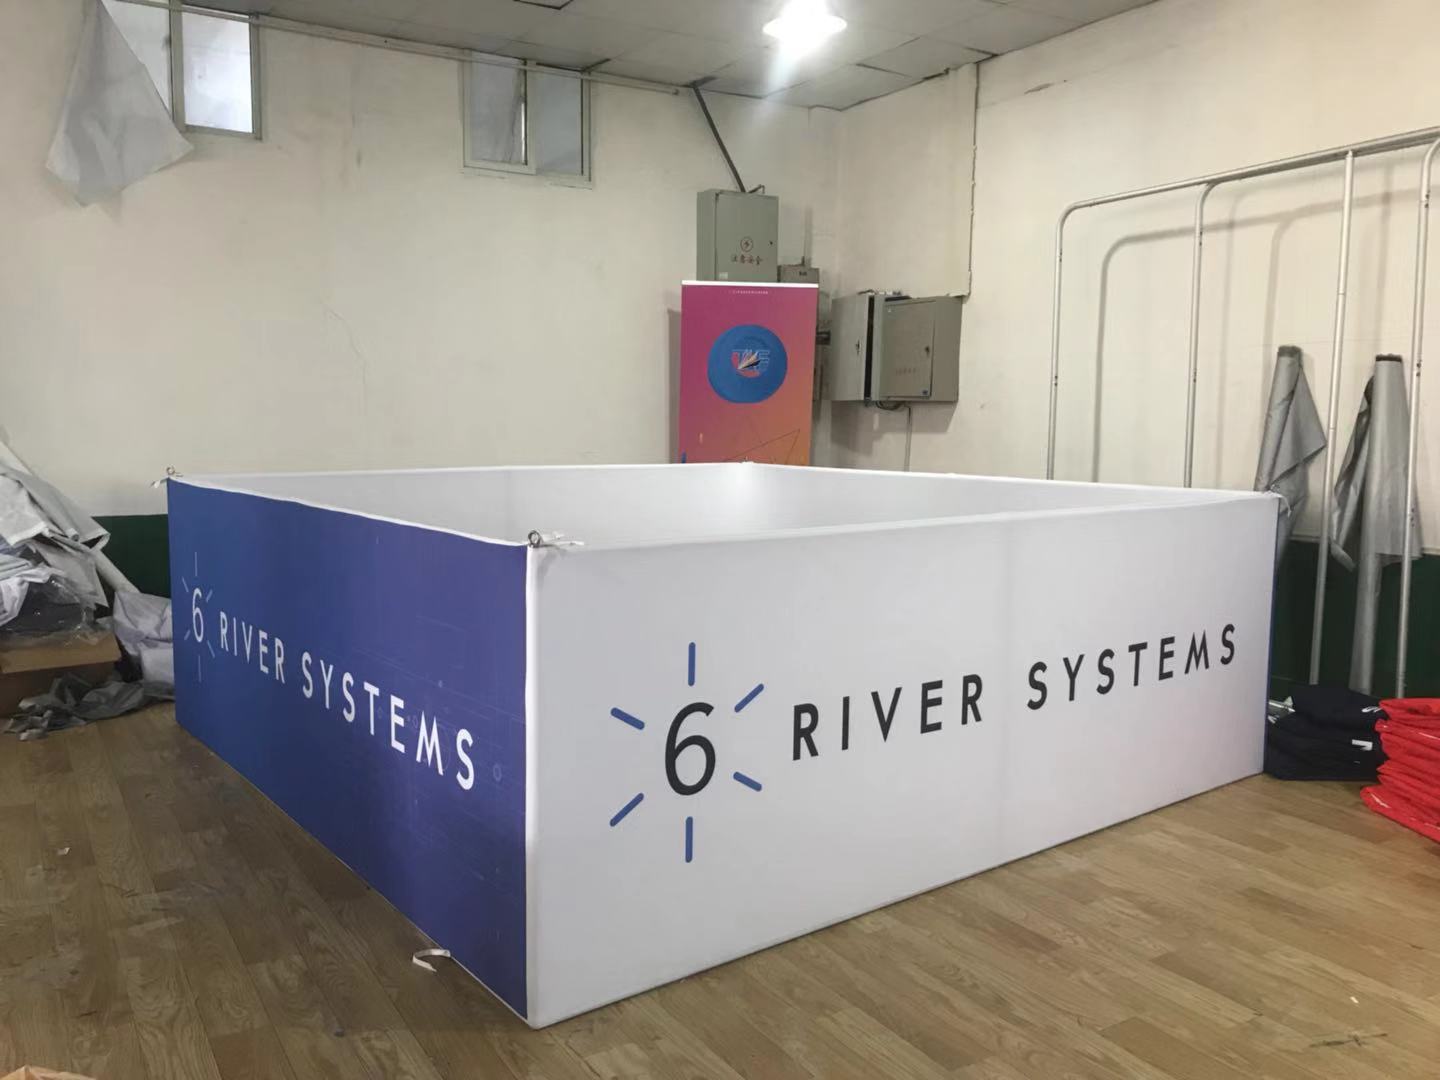 exhibition hang banner sign